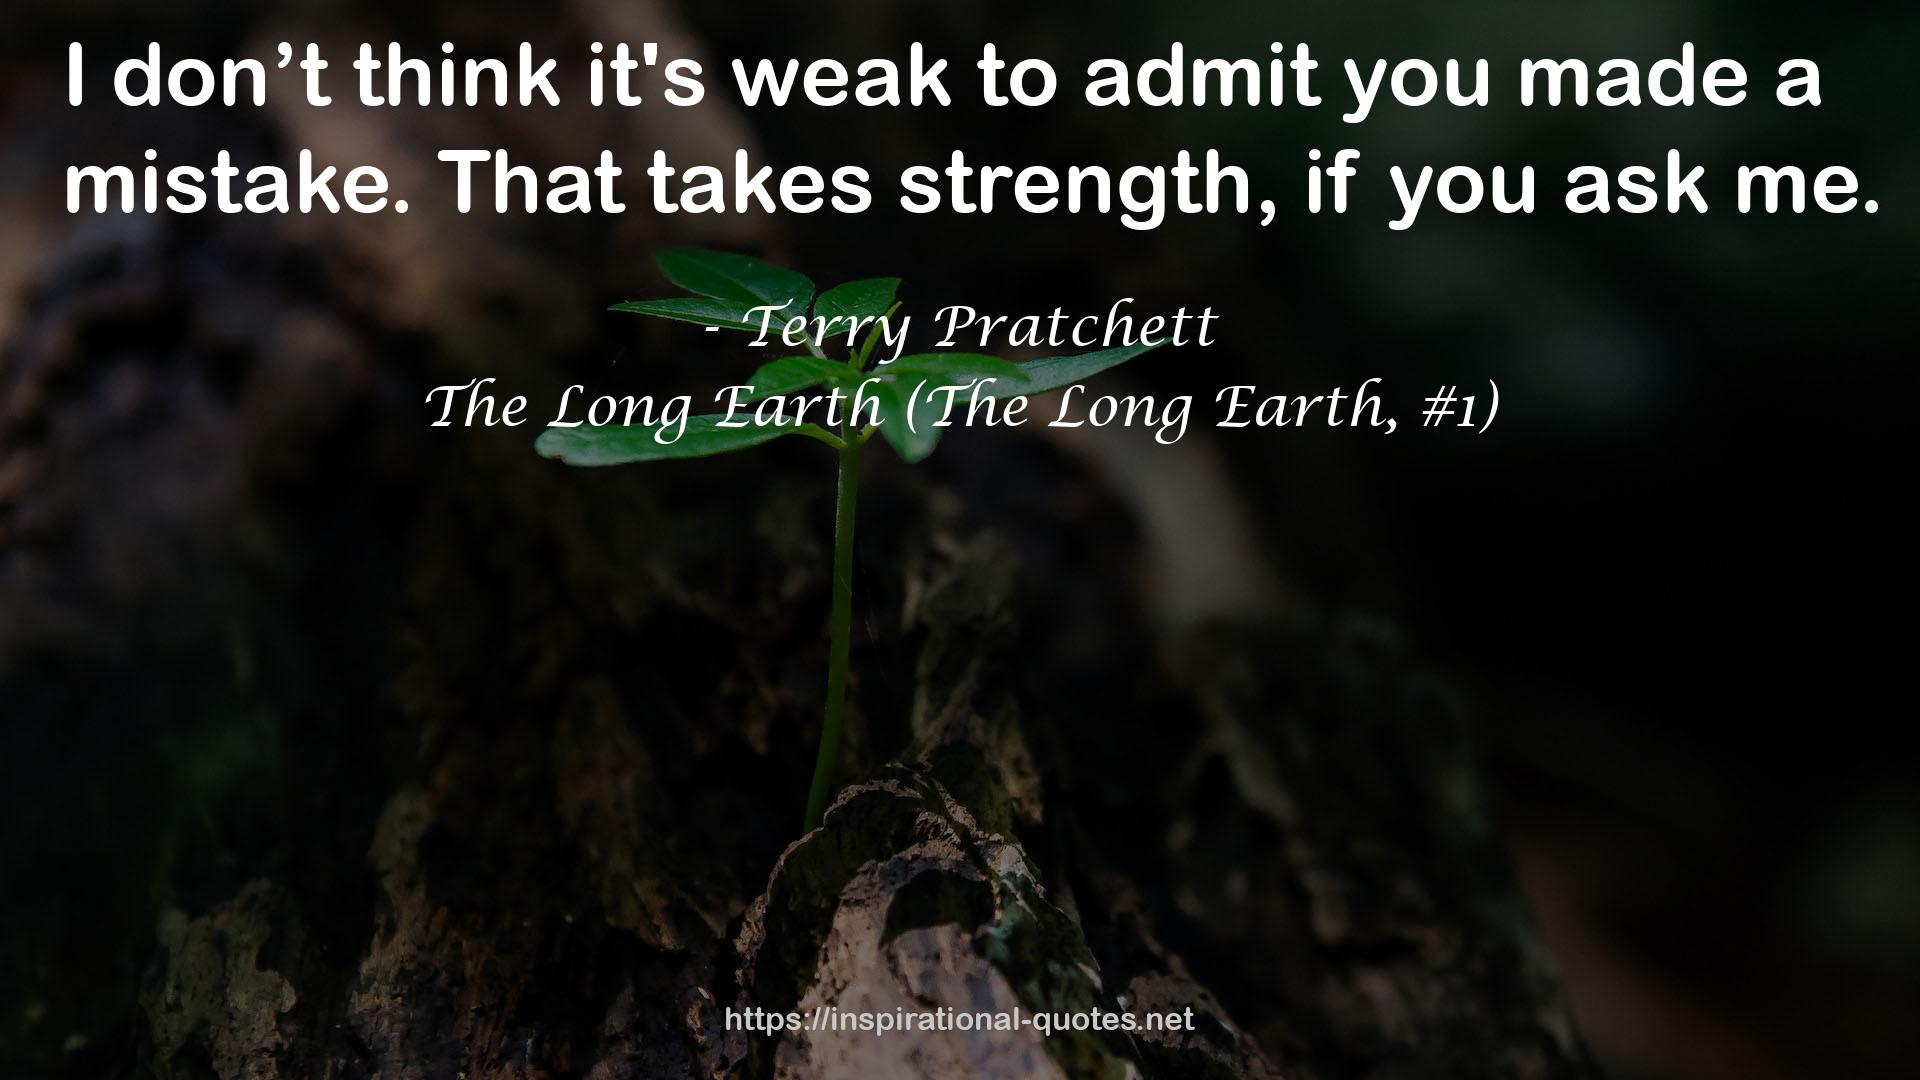 The Long Earth (The Long Earth, #1) QUOTES